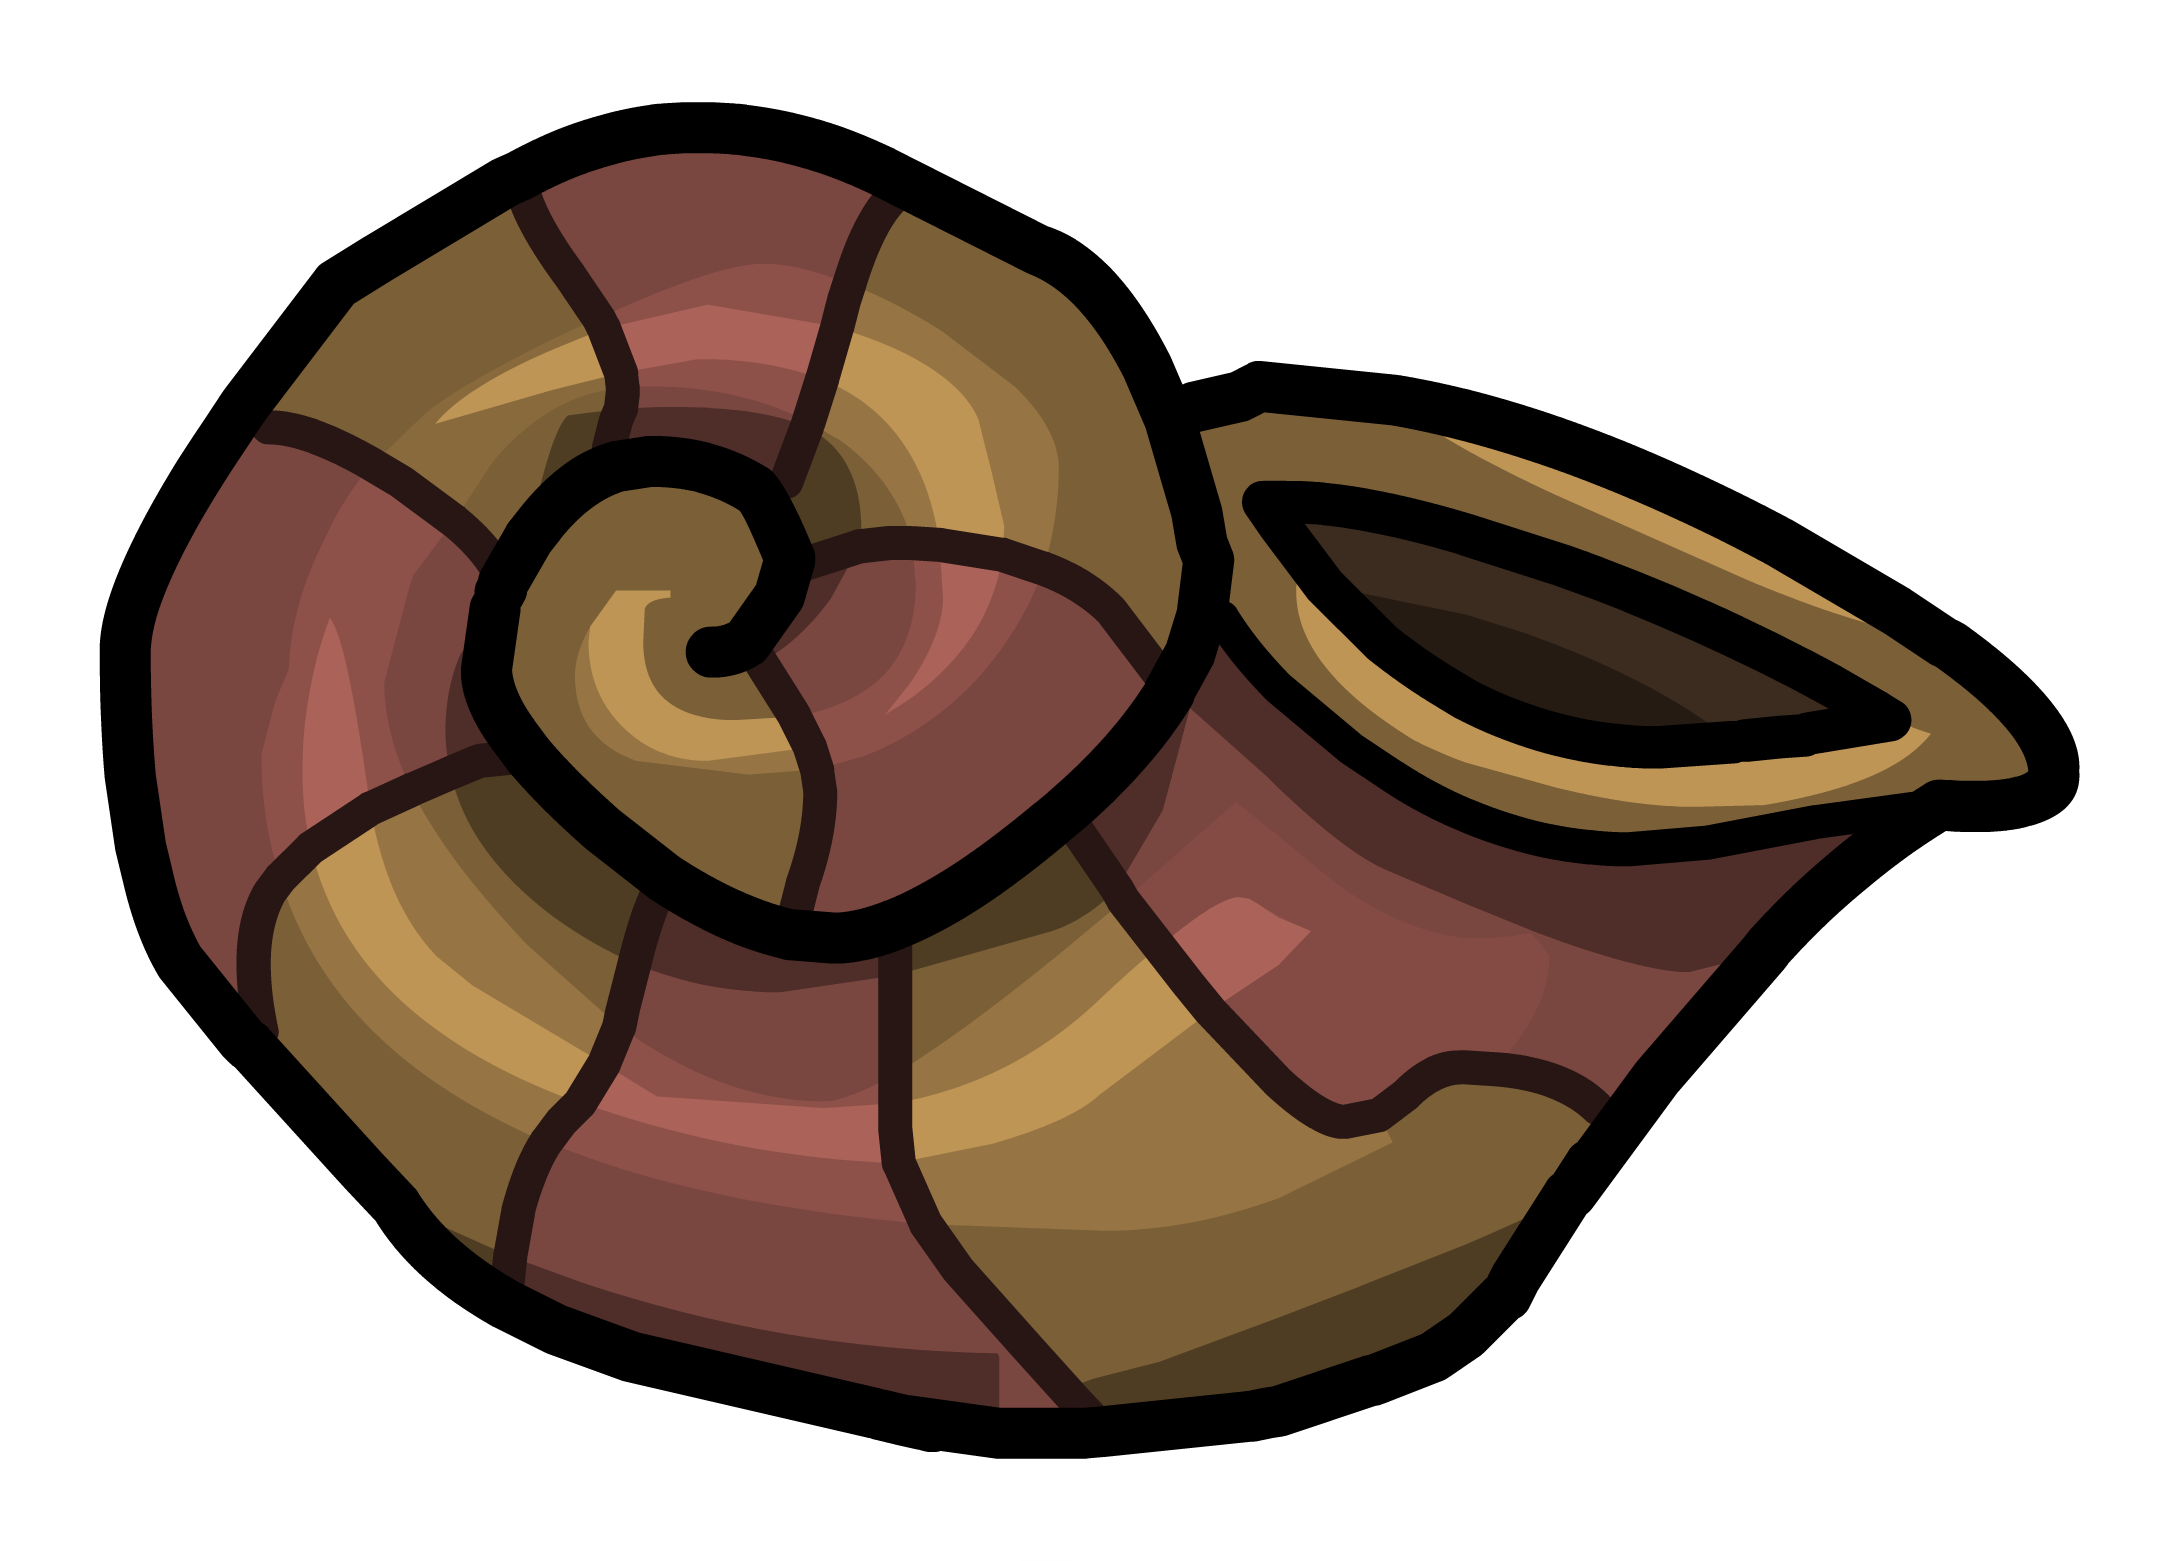 Shell clipart pastel. Conch pin club penguin